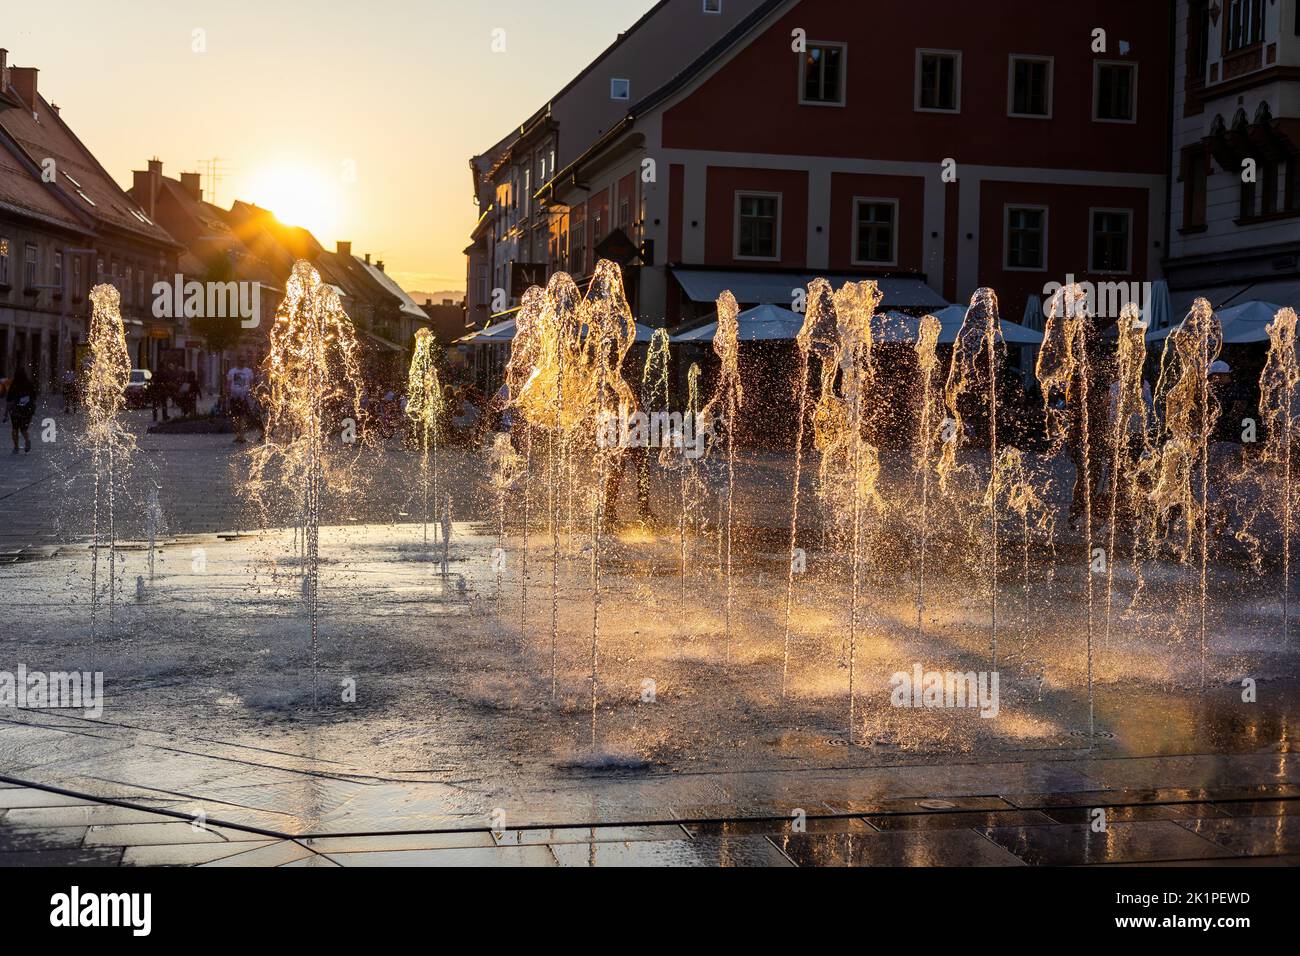 Water spraying from fountain in city of Maribor, Slovenia, at sunset. Stock Photo